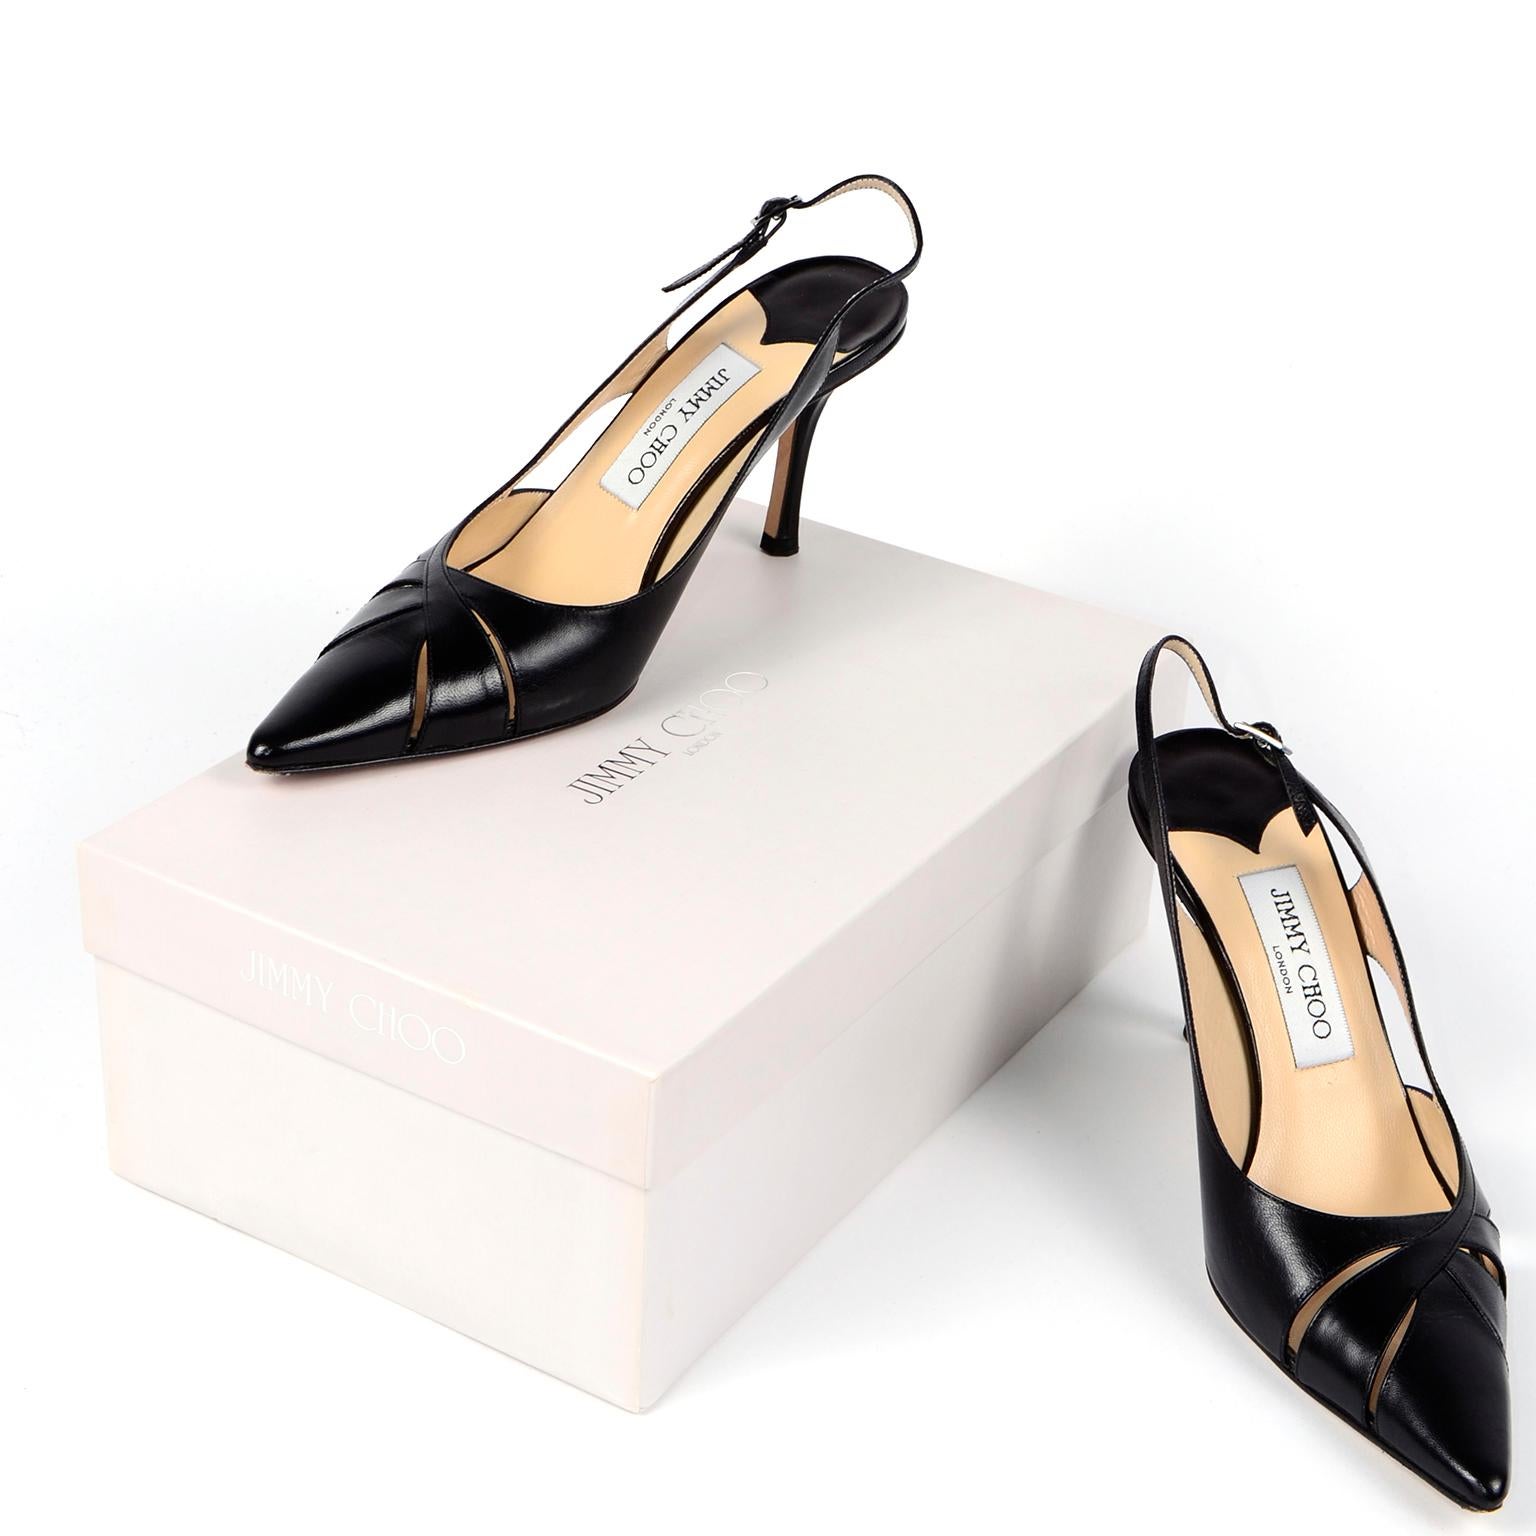 This is a really nice pair of Jimmy Choo Pointed toe slingbacks with cutouts at the toe box and on the sides. These timeless heels were probably only worn once or twice and they come with their original box. Retailed in the 1990's at Saks Fifth